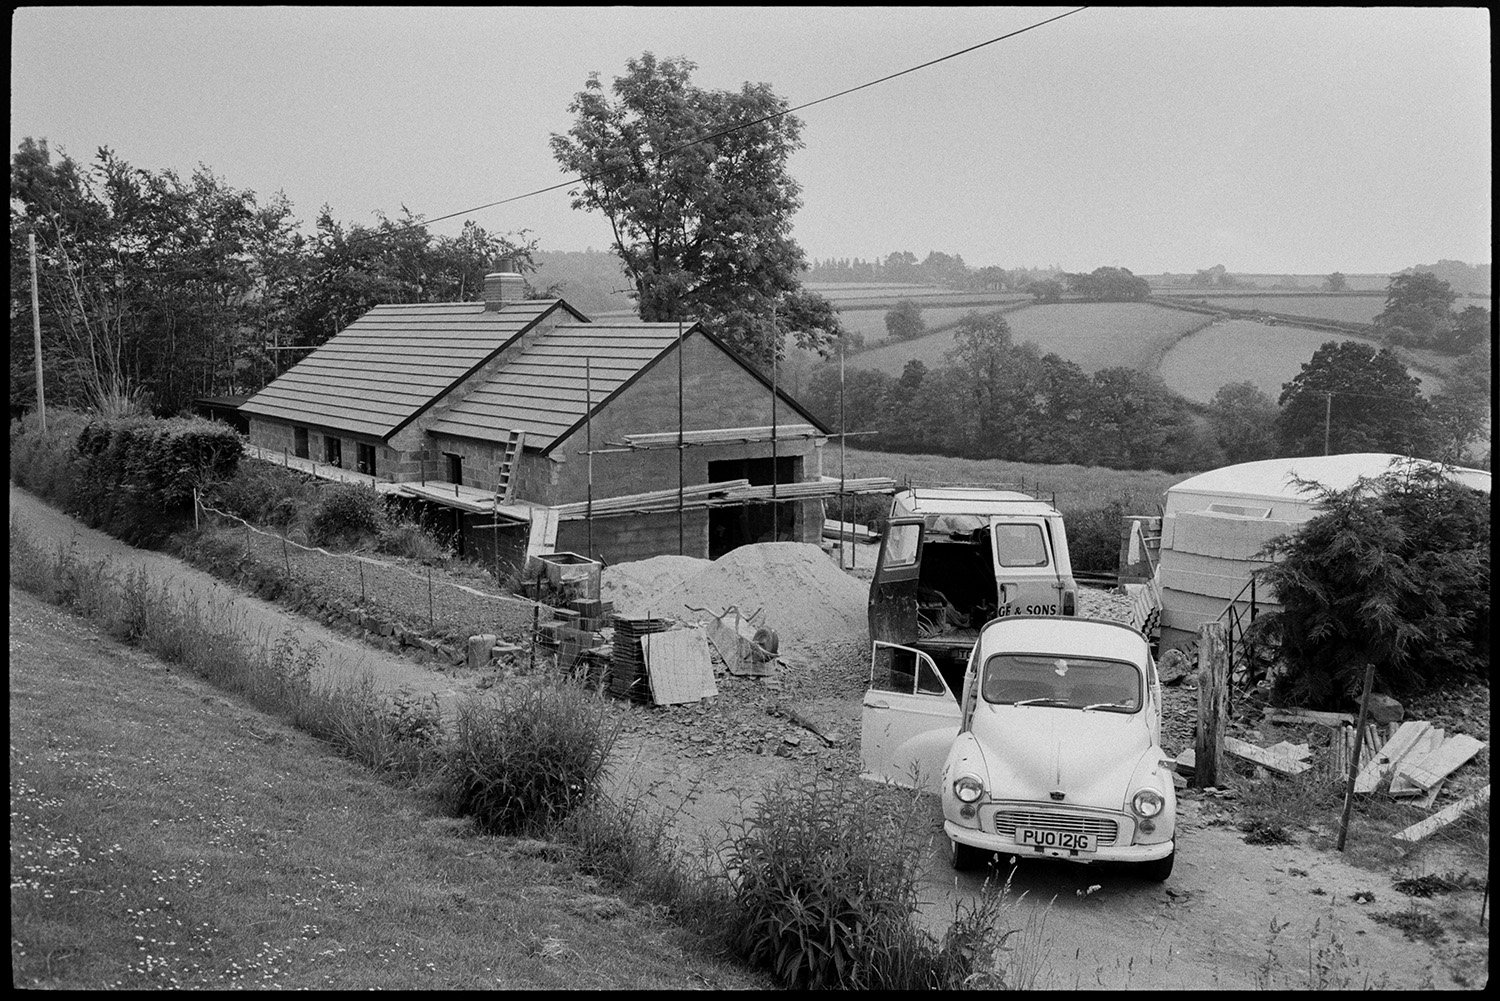 New house under construction.
[Two vans and a caravan parked beside a house being constructed in Aller Road, Dolton. Scaffolding is on the house. A landscape of fields and trees is visible in the background.]